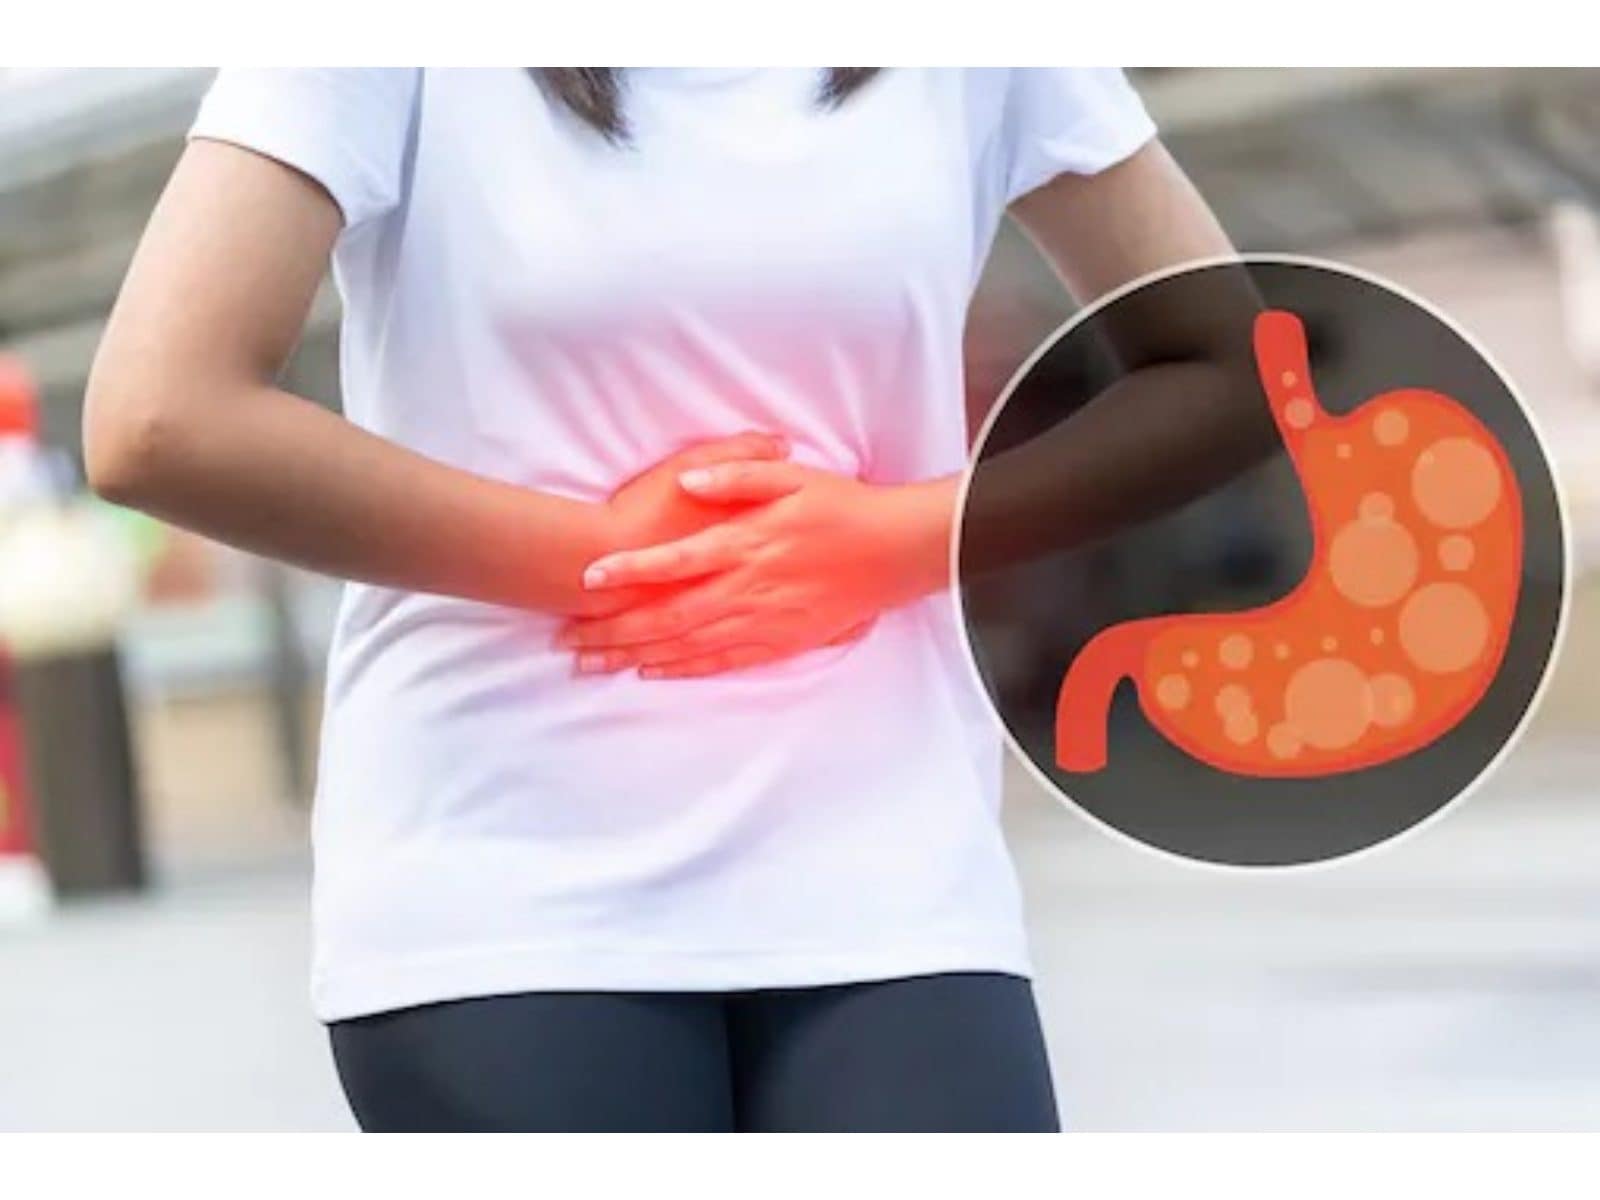 Suffering From Acid Reflux? Try These Tips To Fight It Naturally